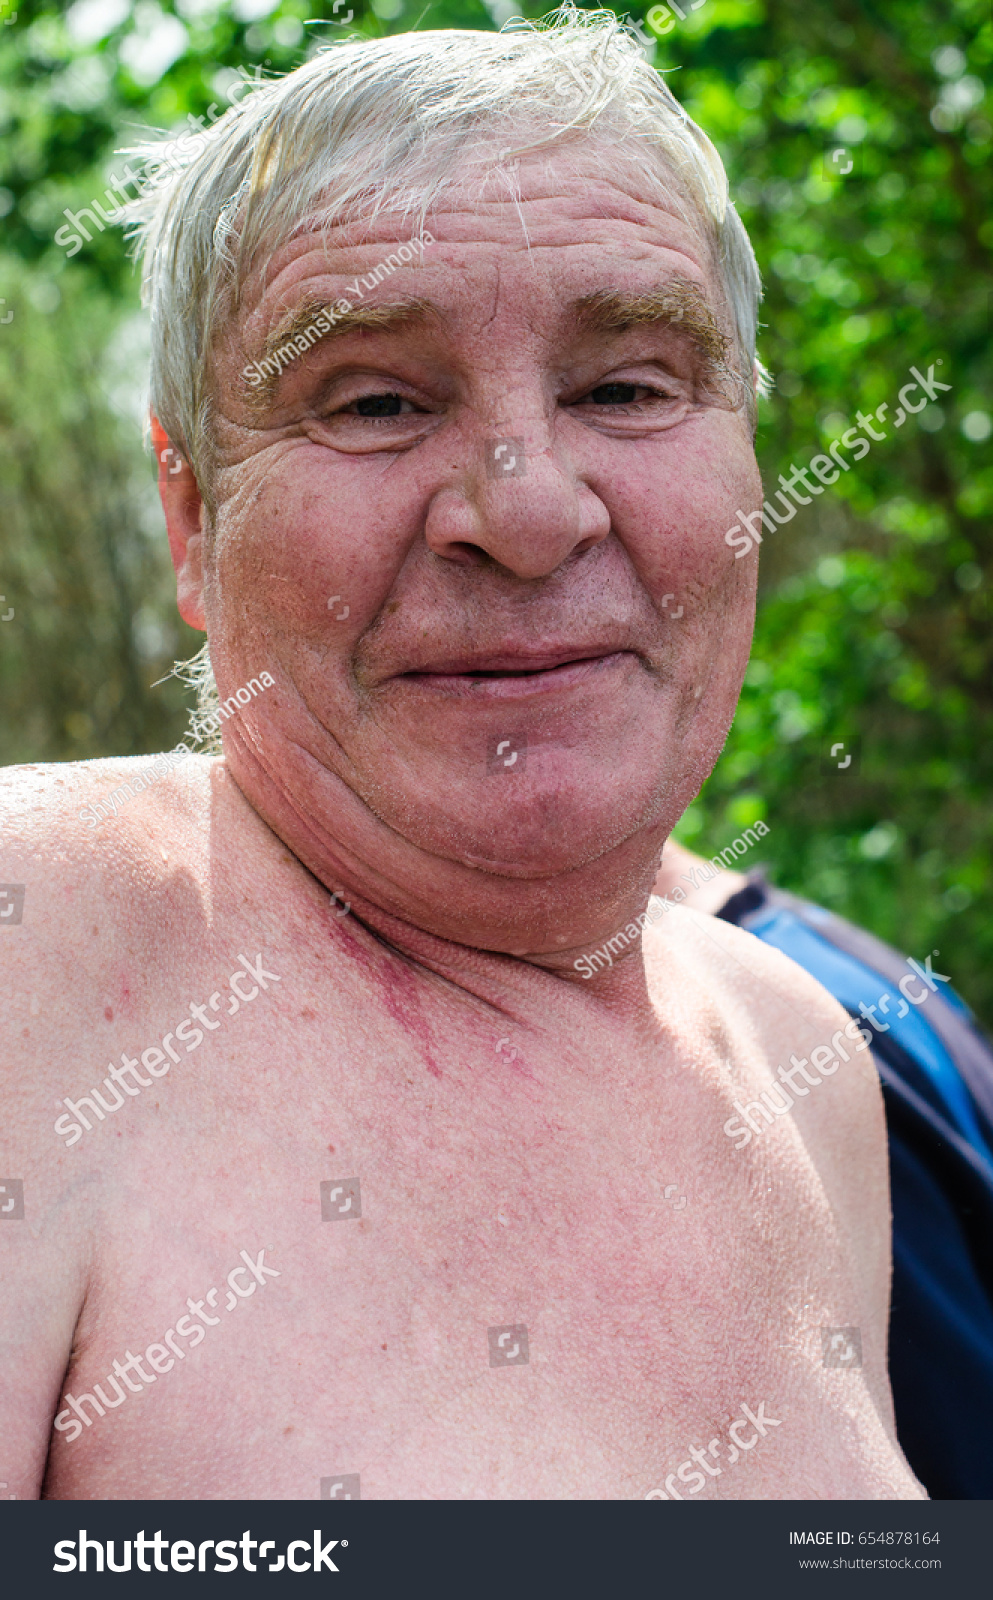 Dangers Alcohol Old Man Chubby Face photo